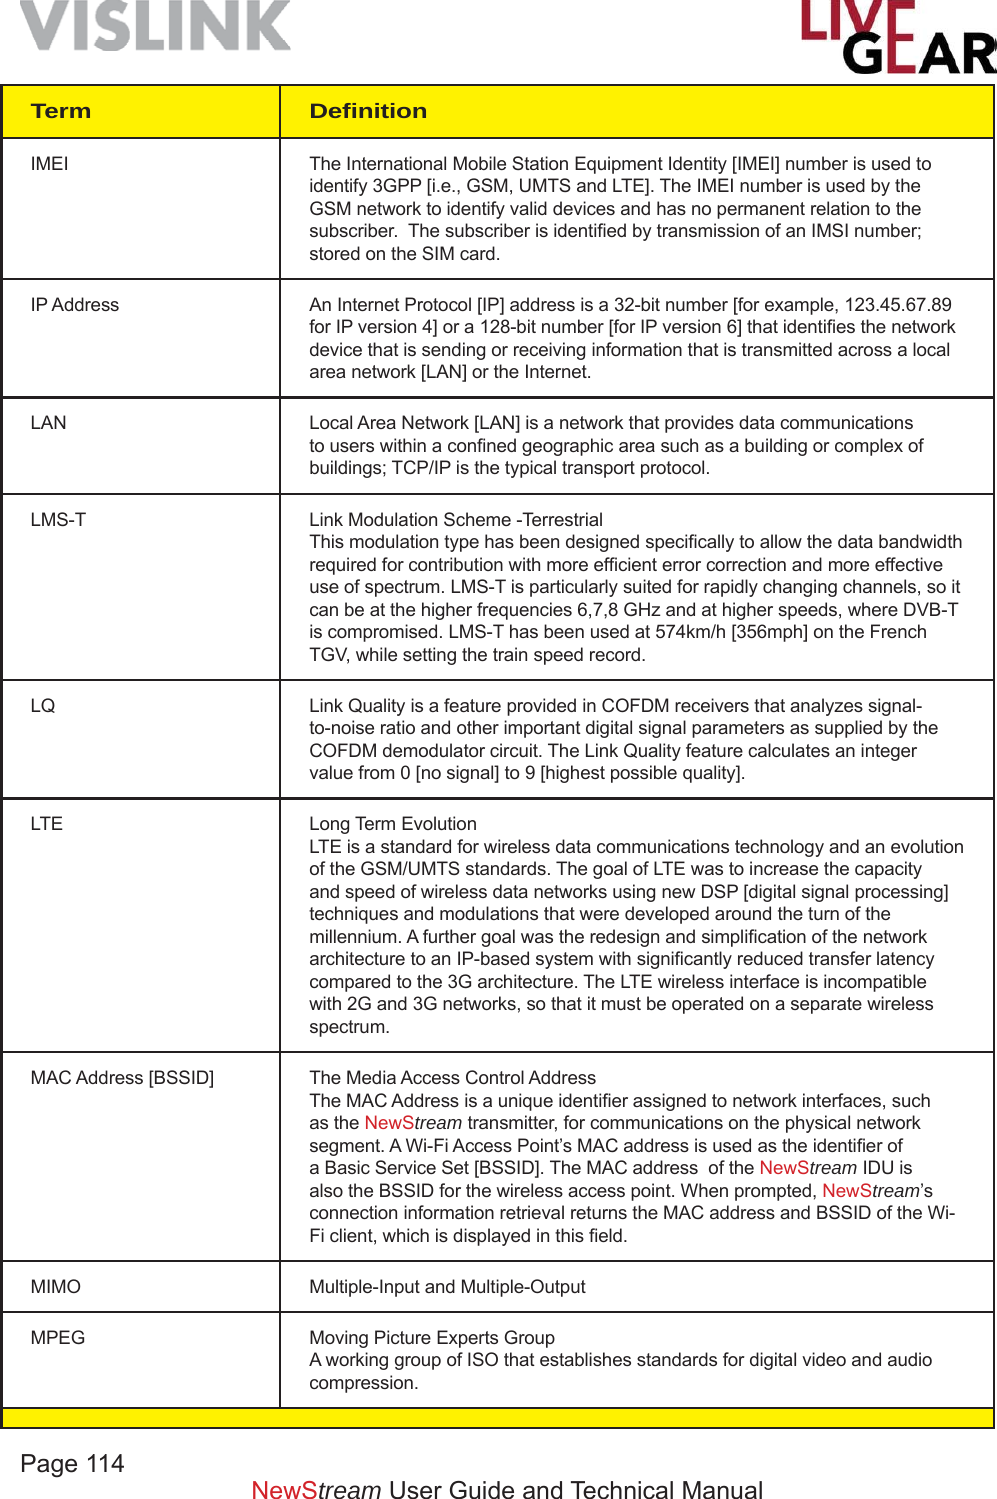 Page 114NewStream User Guide and Technical ManualTerm Deﬁ nitionIMEI The International Mobile Station Equipment Identity [IMEI] number is used to identify 3GPP [i.e., GSM, UMTS and LTE]. The IMEI number is used by the GSM network to identify valid devices and has no permanent relation to the subscriber.  The subscriber is identiﬁ ed by transmission of an IMSI number; stored on the SIM card.IP Address An Internet Protocol [IP] address is a 32-bit number [for example, 123.45.67.89 for IP version 4] or a 128-bit number [for IP version 6] that identiﬁ es the network device that is sending or receiving information that is transmitted across a local area network [LAN] or the Internet.LAN Local Area Network [LAN] is a network that provides data communications to users within a conﬁ ned geographic area such as a building or complex of buildings; TCP/IP is the typical transport protocol.LMS-T Link Modulation Scheme -Terrestrial This modulation type has been designed speciﬁ cally to allow the data bandwidth required for contribution with more efﬁ cient error correction and more effective use of spectrum. LMS-T is particularly suited for rapidly changing channels, so it can be at the higher frequencies 6,7,8 GHz and at higher speeds, where DVB-T is compromised. LMS-T has been used at 574km/h [356mph] on the French TGV, while setting the train speed record.LQ Link Quality is a feature provided in COFDM receivers that analyzes signal-to-noise ratio and other important digital signal parameters as supplied by the COFDM demodulator circuit. The Link Quality feature calculates an integer value from 0 [no signal] to 9 [highest possible quality].LTE Long Term Evolution LTE is a standard for wireless data communications technology and an evolution of the GSM/UMTS standards. The goal of LTE was to increase the capacity and speed of wireless data networks using new DSP [digital signal processing] techniques and modulations that were developed around the turn of the millennium. A further goal was the redesign and simpliﬁ cation of the network architecture to an IP-based system with signiﬁ cantly reduced transfer latency compared to the 3G architecture. The LTE wireless interface is incompatible with 2G and 3G networks, so that it must be operated on a separate wireless spectrum.MAC Address [BSSID] The Media Access Control Address The MAC Address is a unique identiﬁ er assigned to network interfaces, such as the NewStream transmitter, for communications on the physical network segment. A Wi-Fi Access Point’s MAC address is used as the identiﬁ er of a Basic Service Set [BSSID]. The MAC address  of the NewStream IDU is also the BSSID for the wireless access point. When prompted, NewStream’s connection information retrieval returns the MAC address and BSSID of the Wi-Fi client, which is displayed in this ﬁ eld.MIMO Multiple-Input and Multiple-OutputMPEG Moving Picture Experts GroupA working group of ISO that establishes standards for digital video and audio compression.